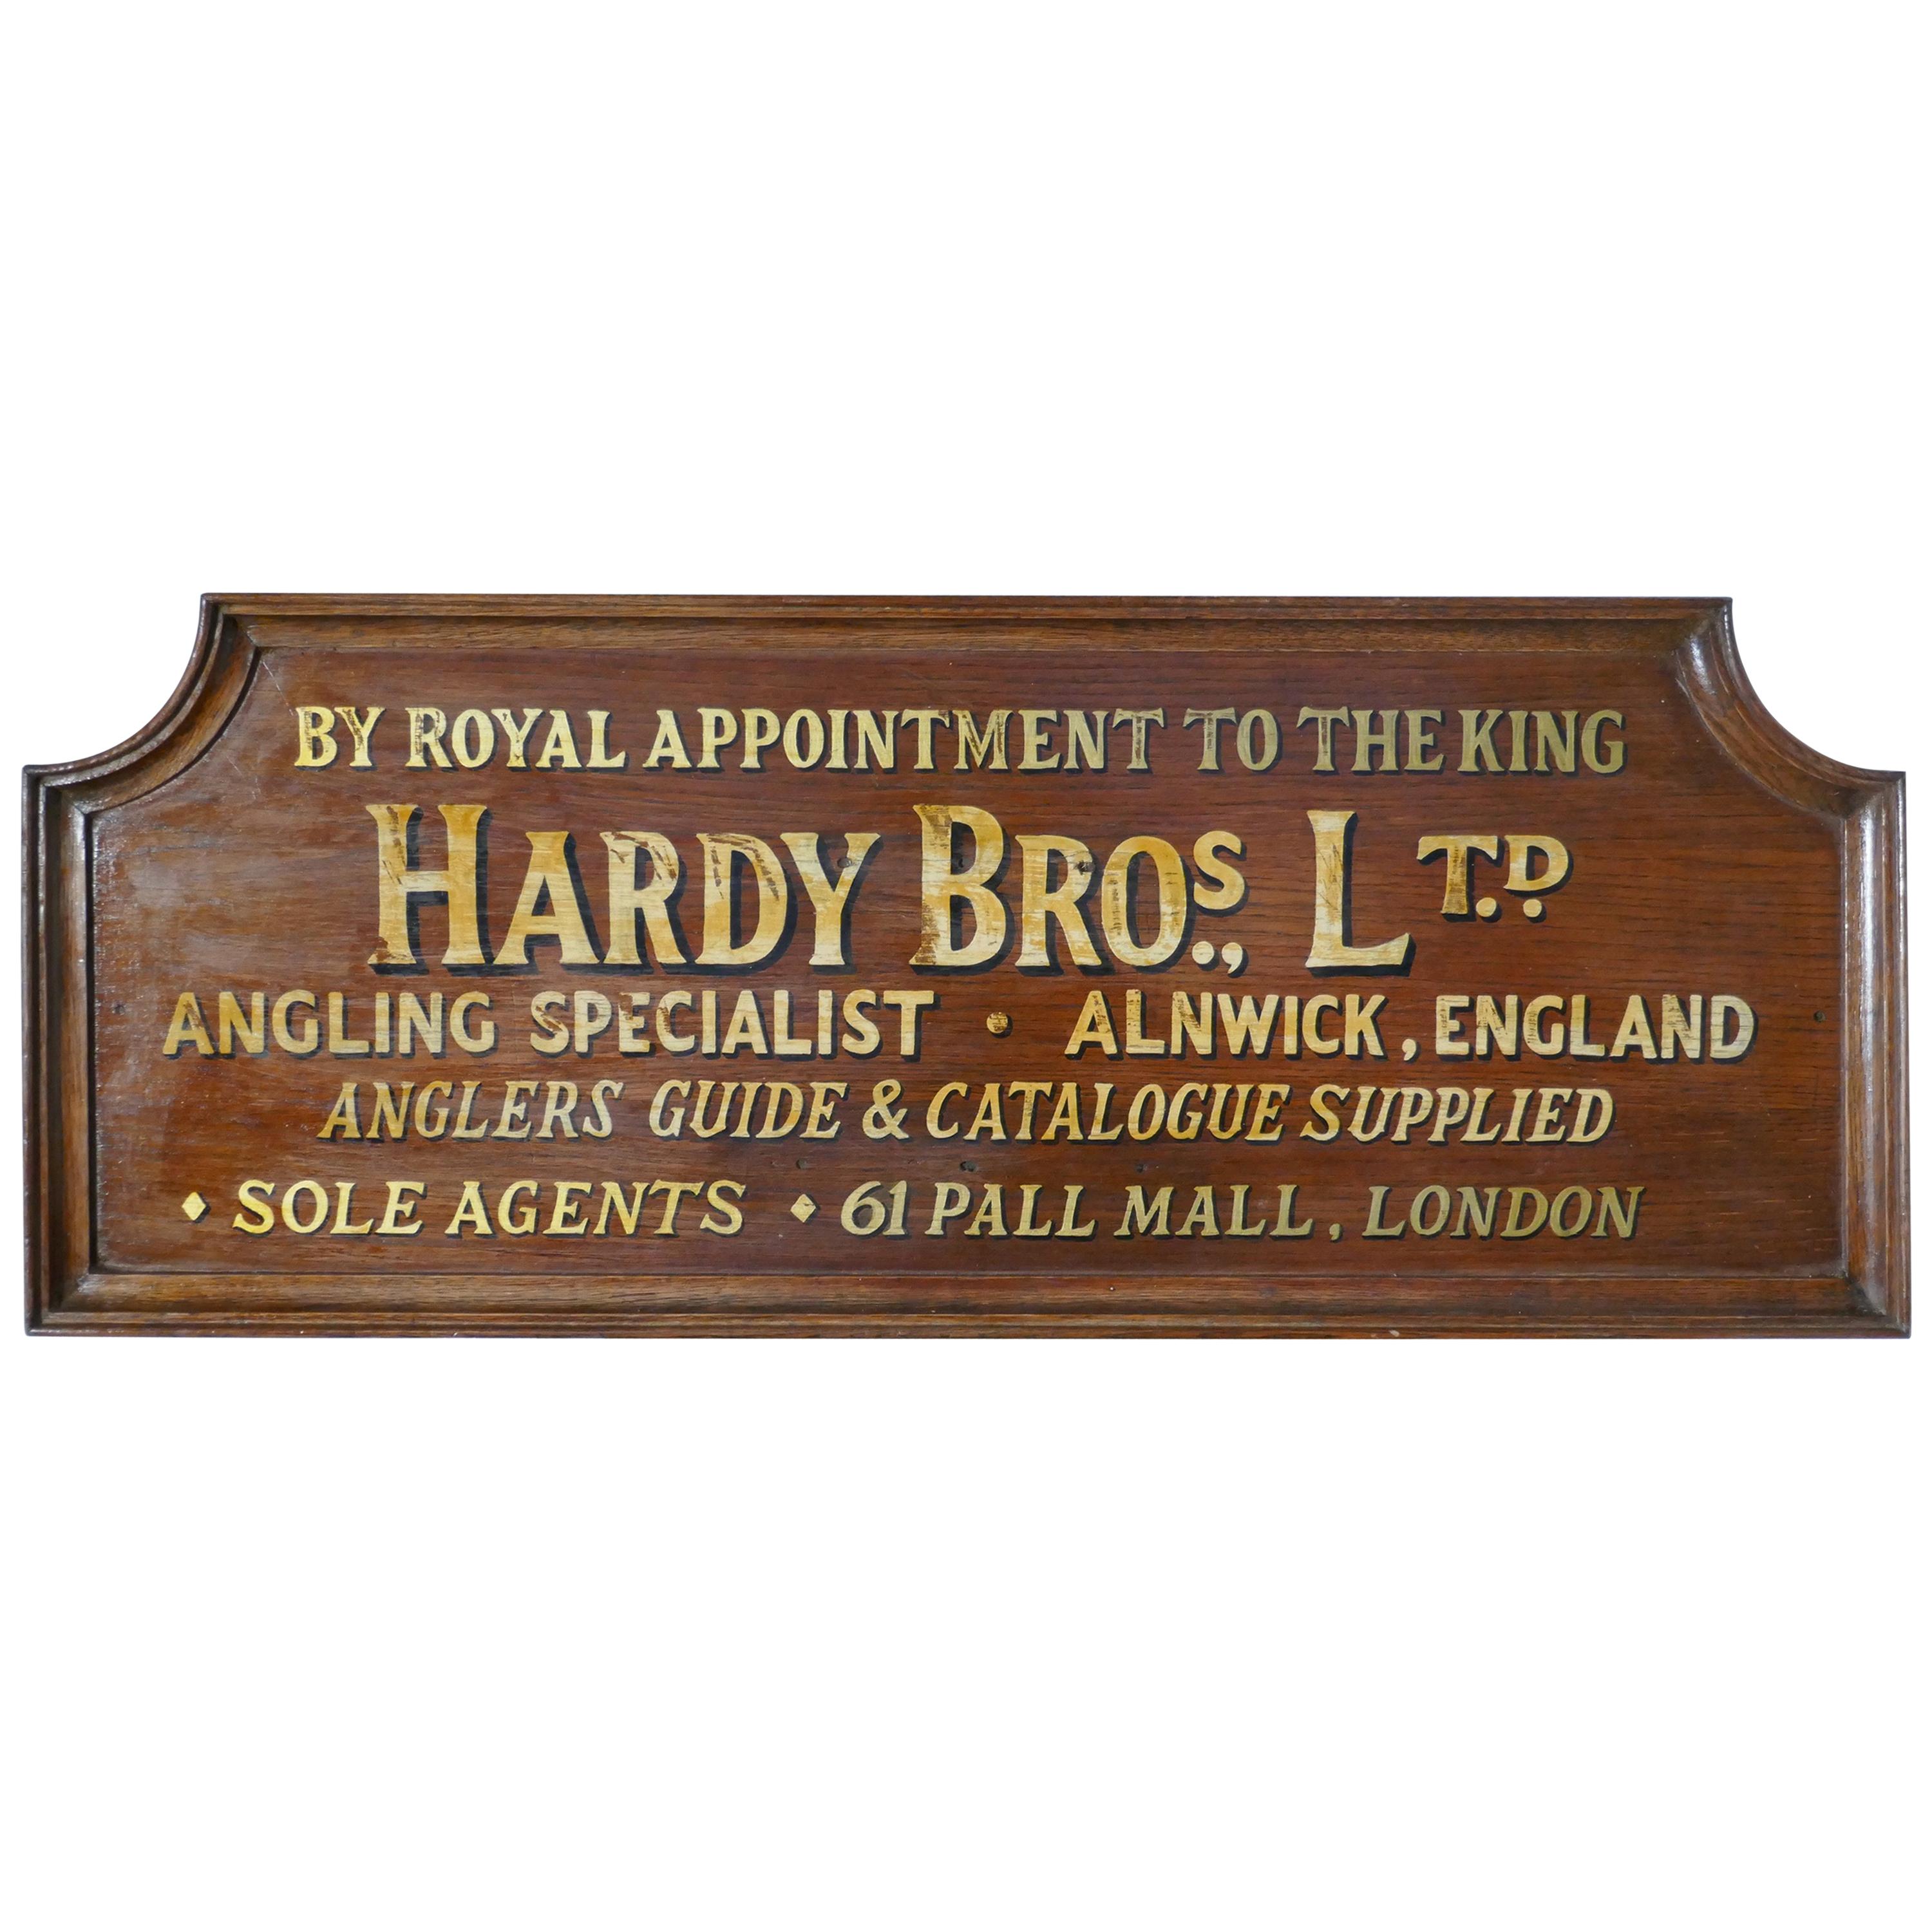 Hardy Bros Ltd, Angling Specialists Large Oak Wall Plaque